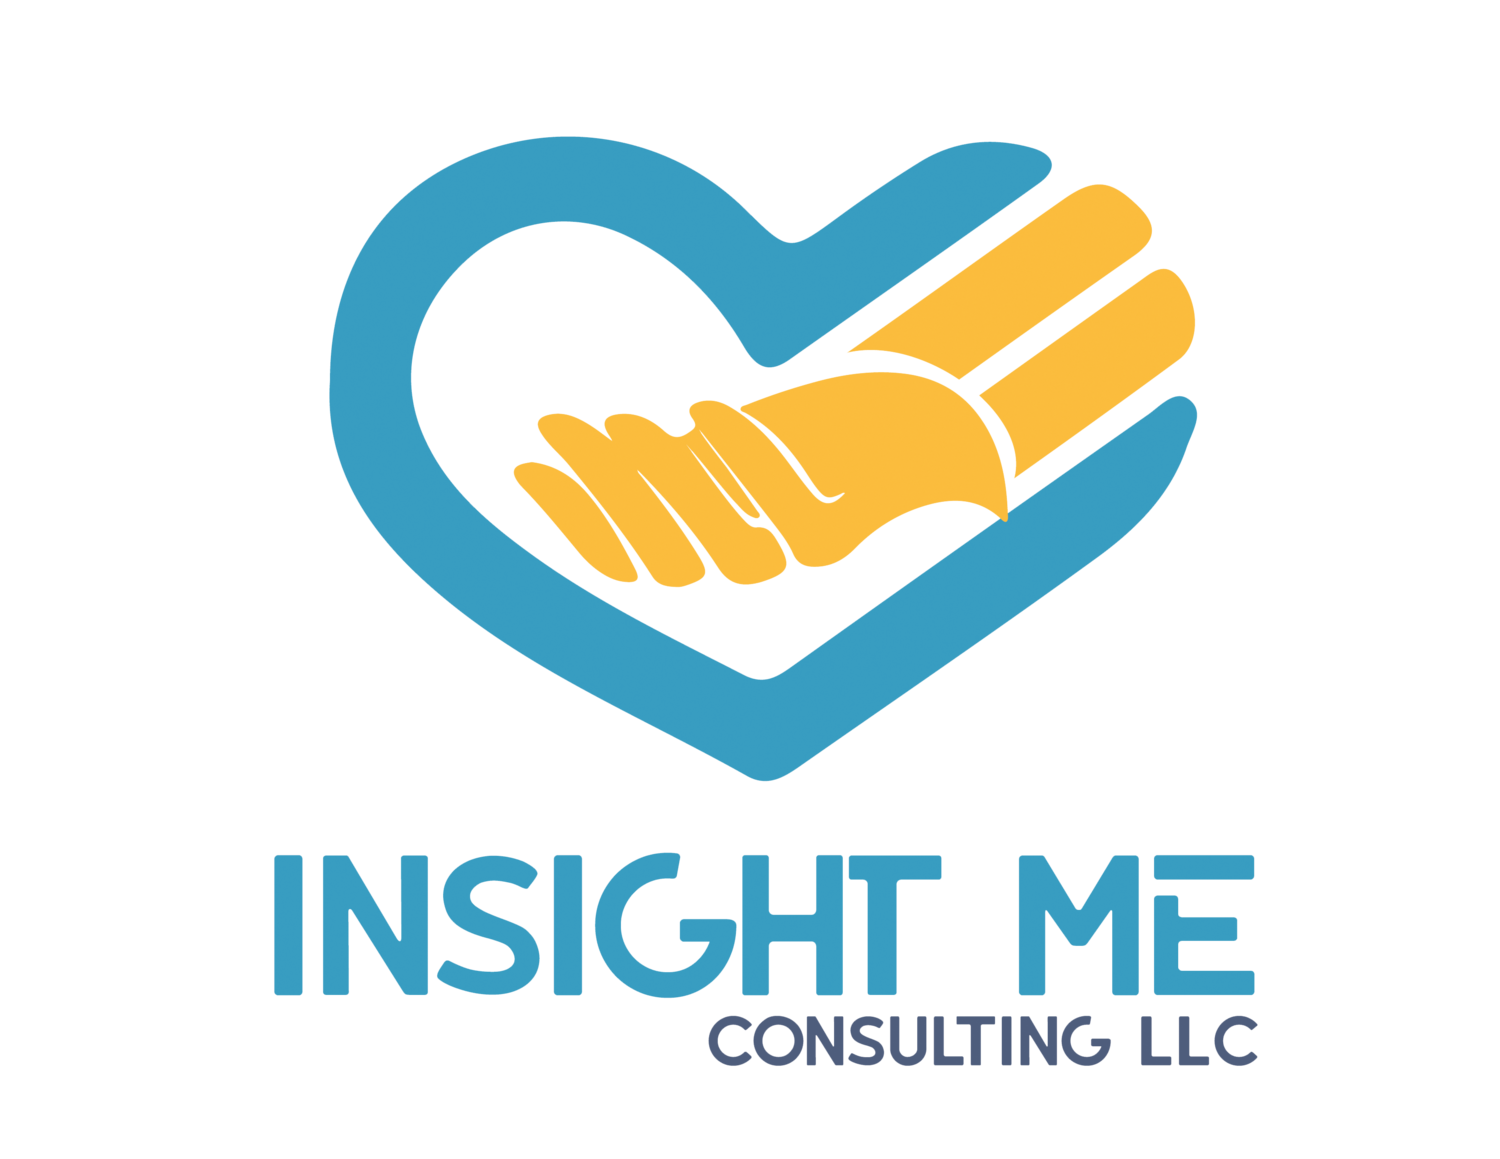 Insight Me Consulting Inc